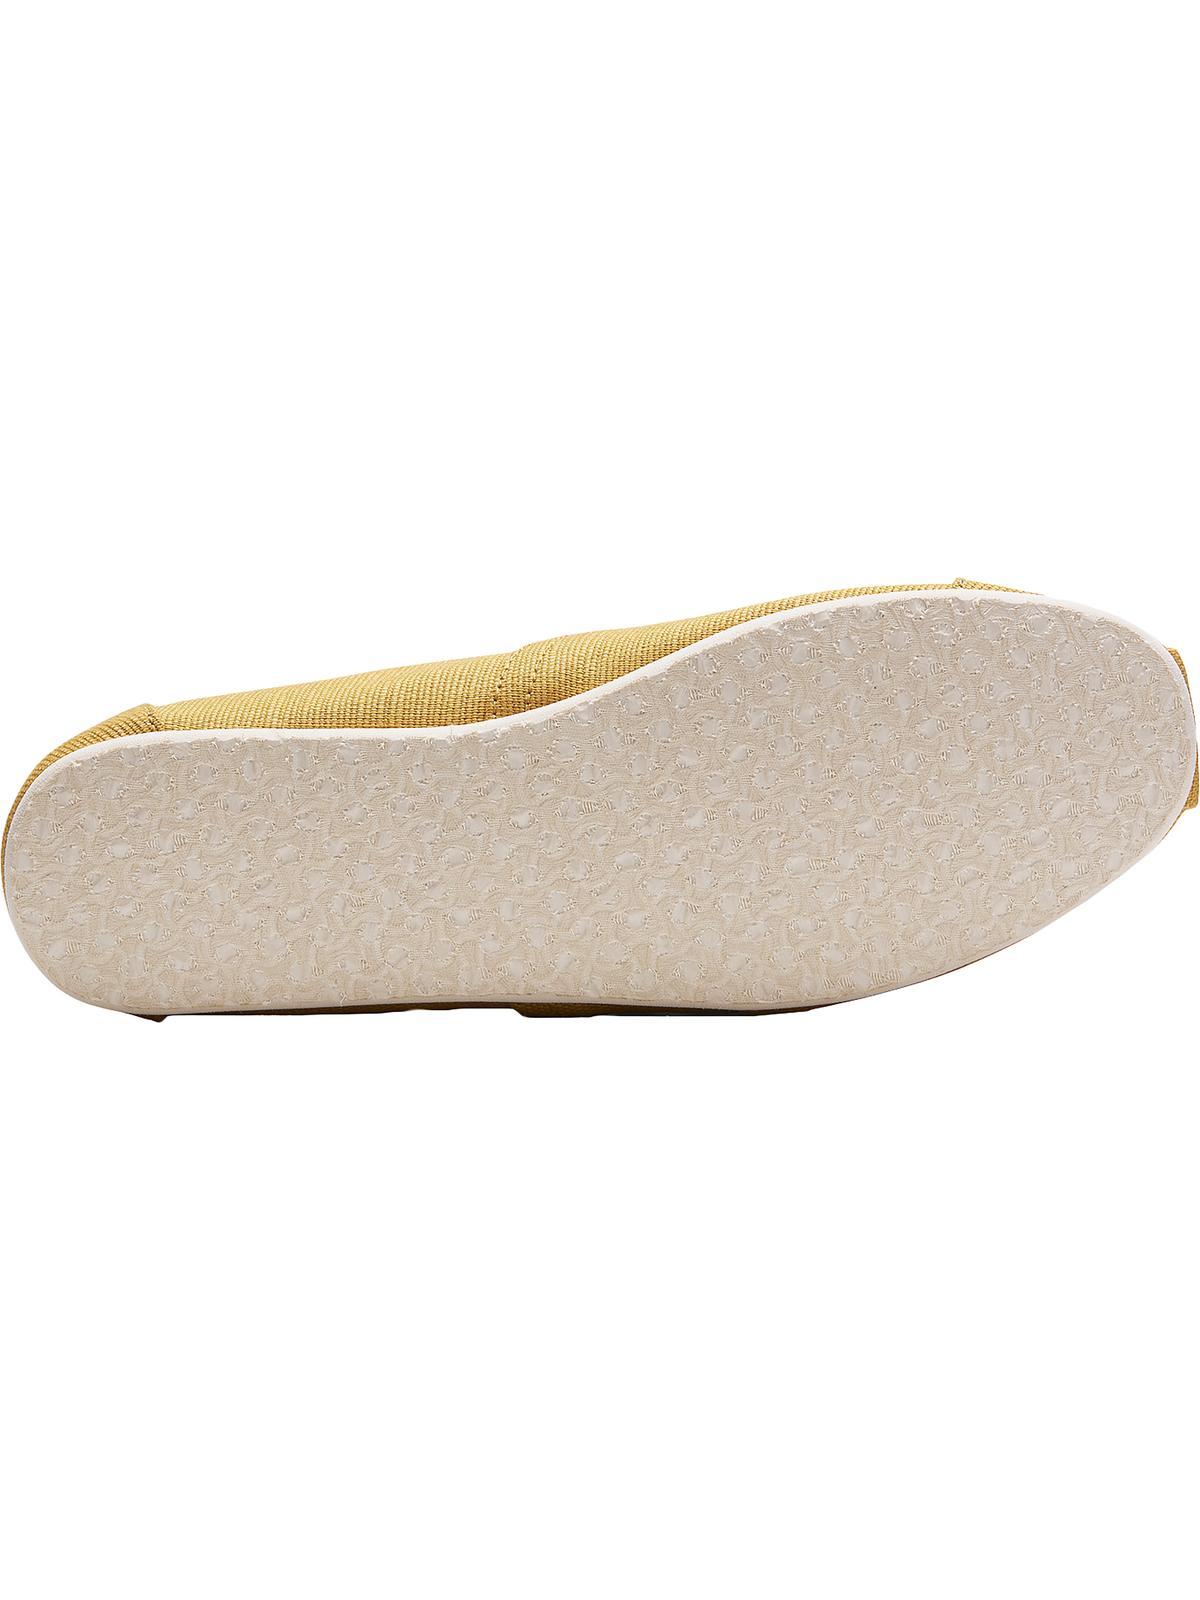 Toms Mens Classic Canvas Slip On Casual Shoes - image 3 of 3